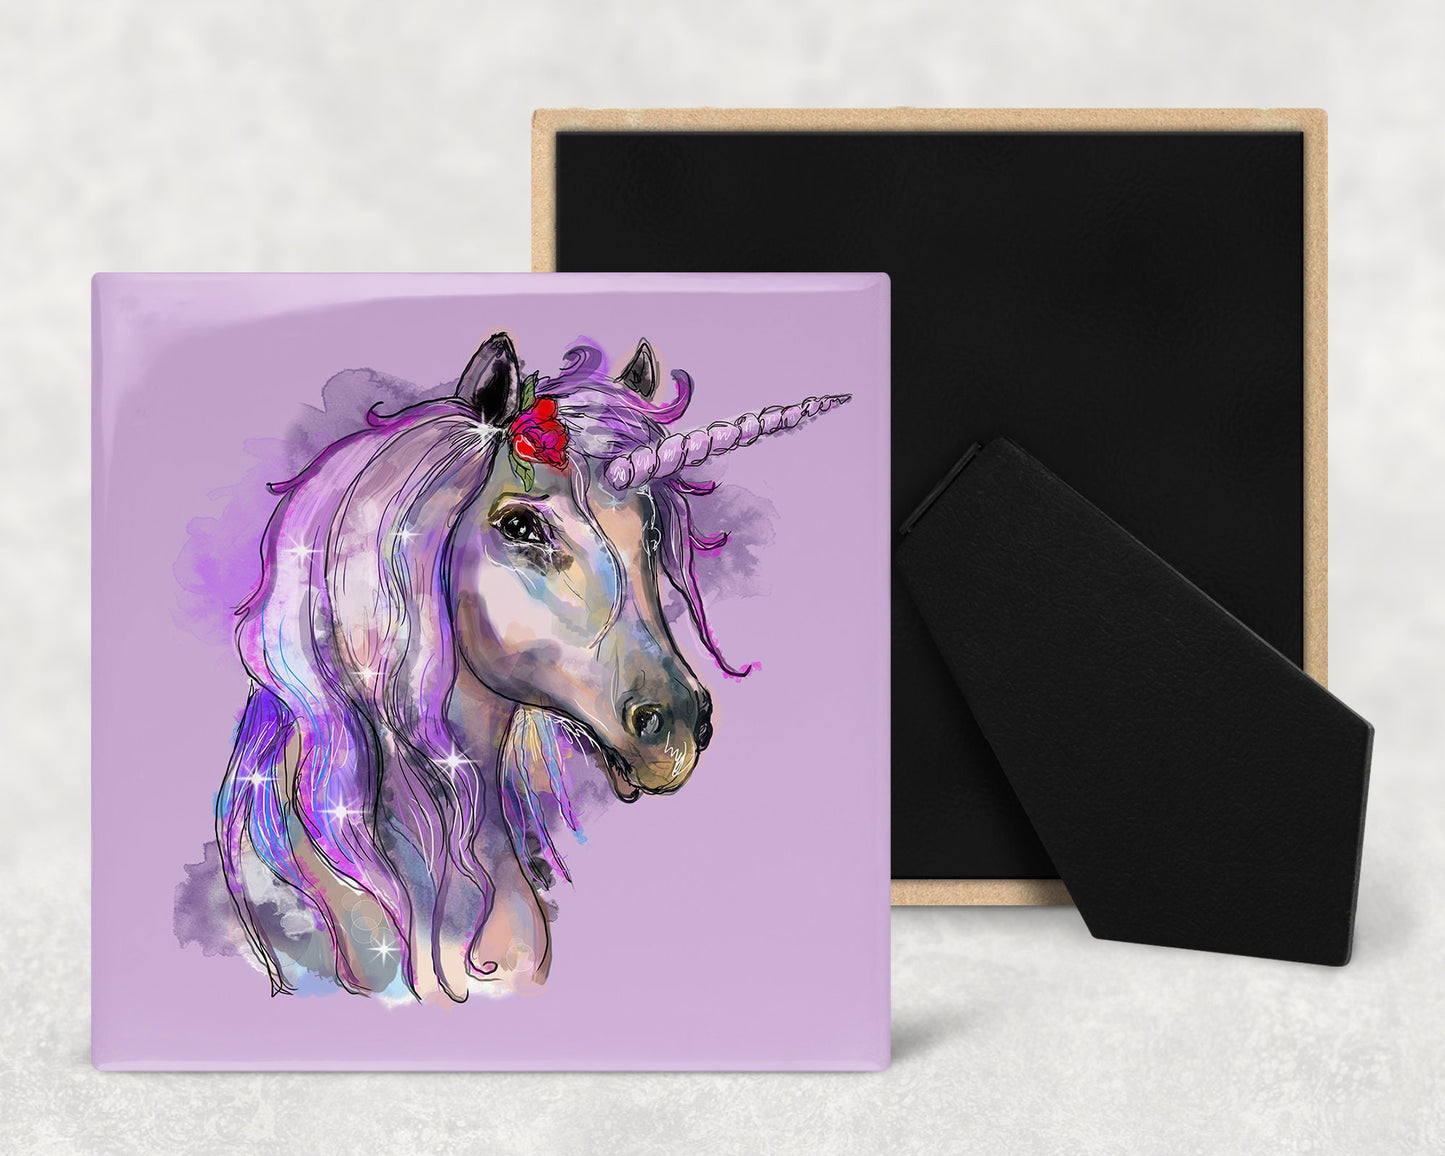 Beautiful Unicorn Art Decorative Ceramic Tile with Optional Easel Back - Available in 3 Sizes